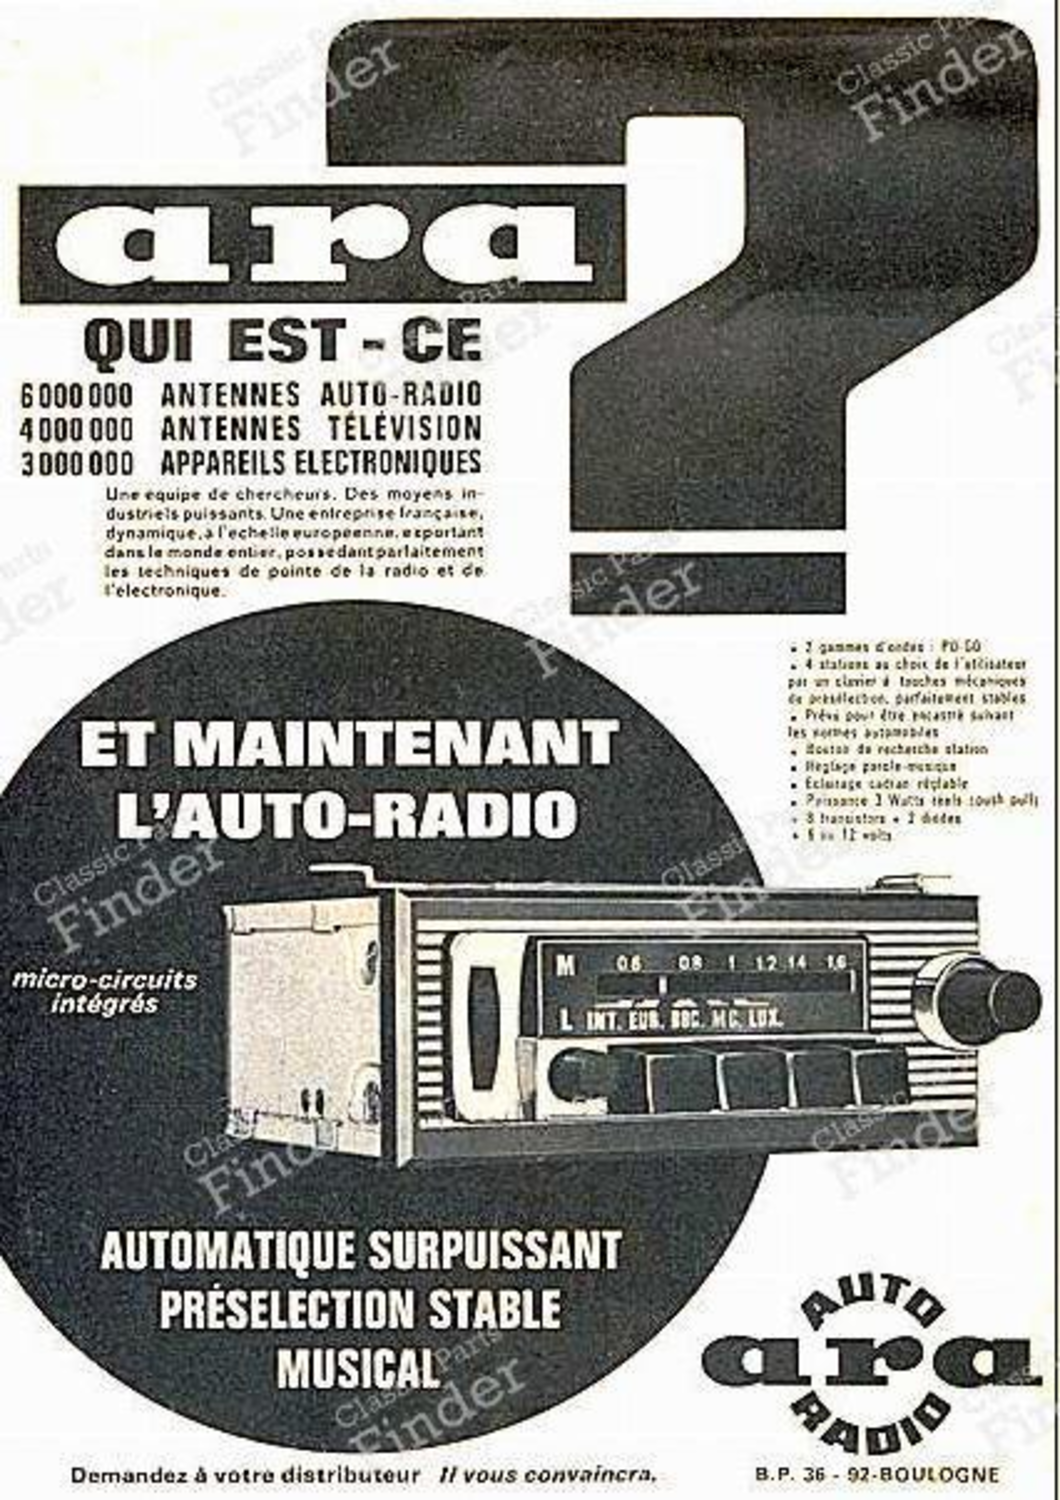 ARA car radio for DS or GS - CITROËN DS / ID - Ref. Javel / Concorde